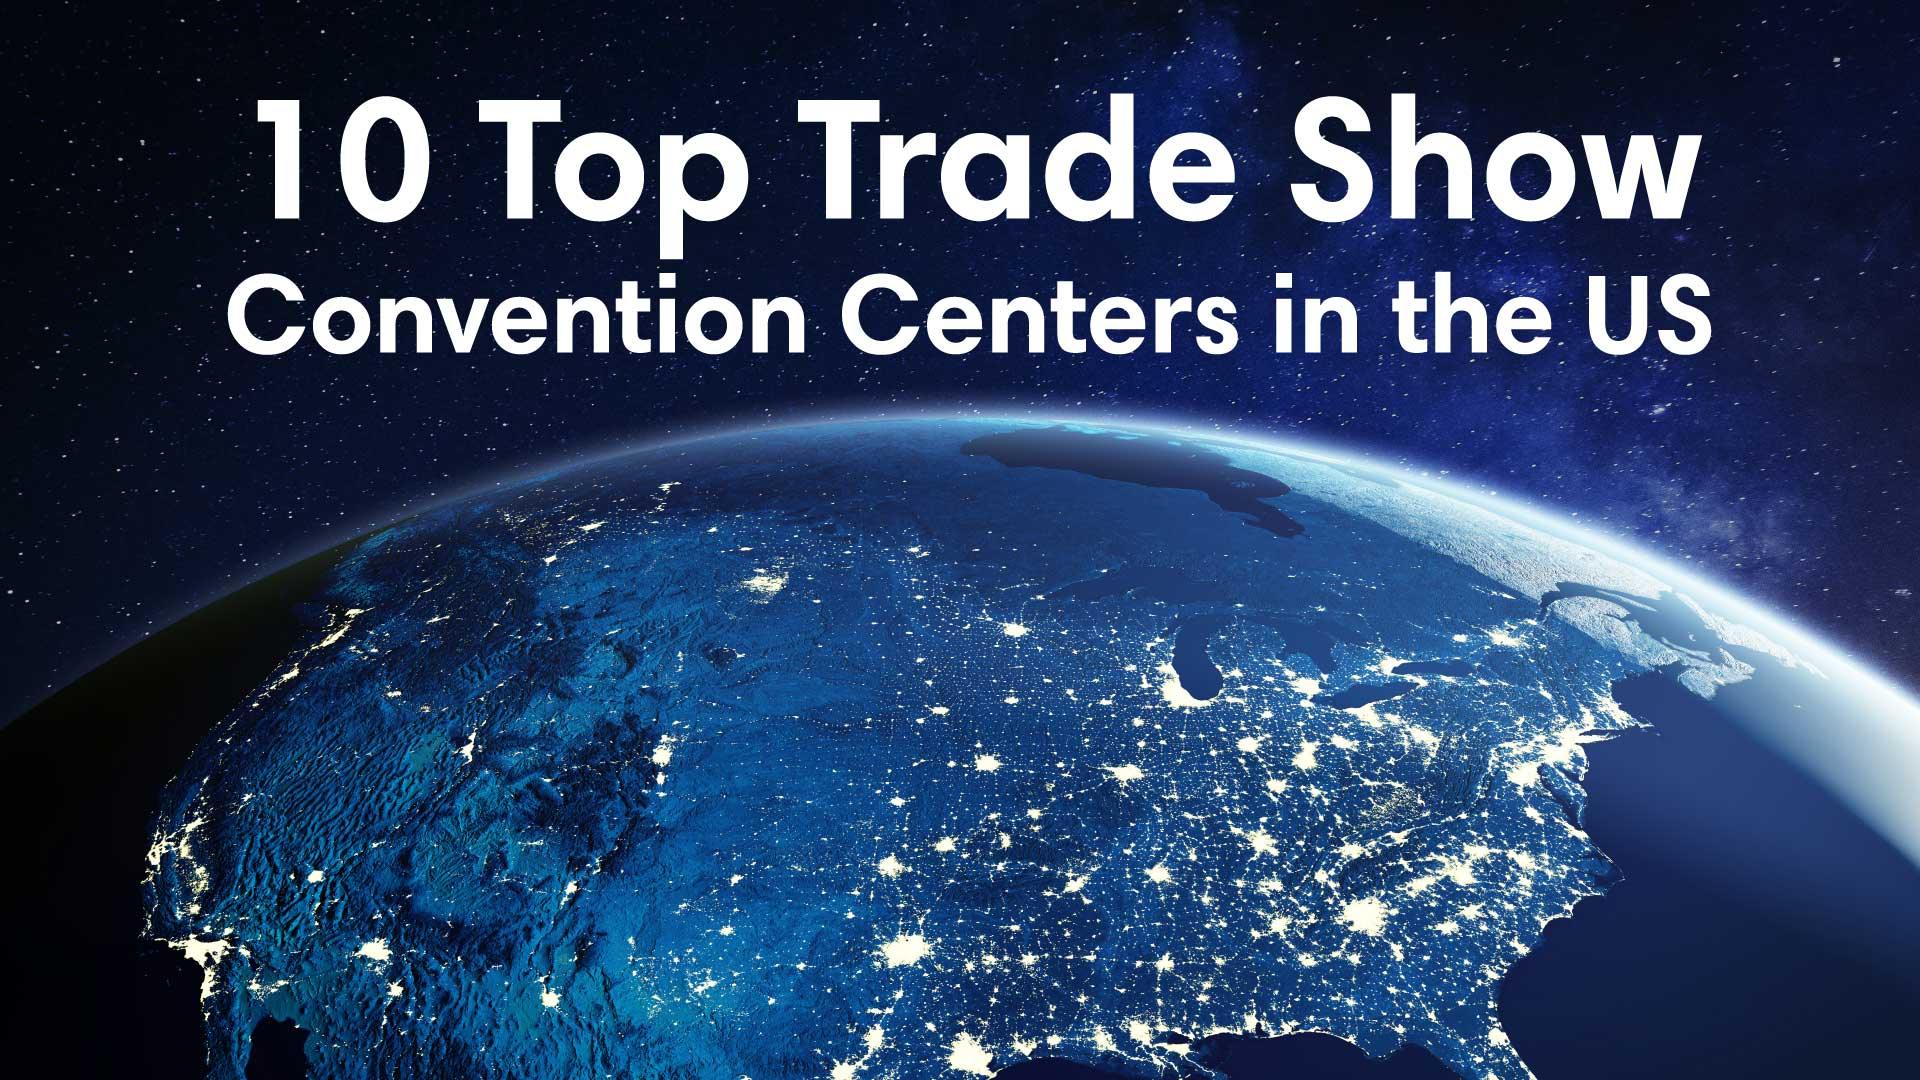 10 Top Trade Show Convention Centers in the US - TradeShowPlus